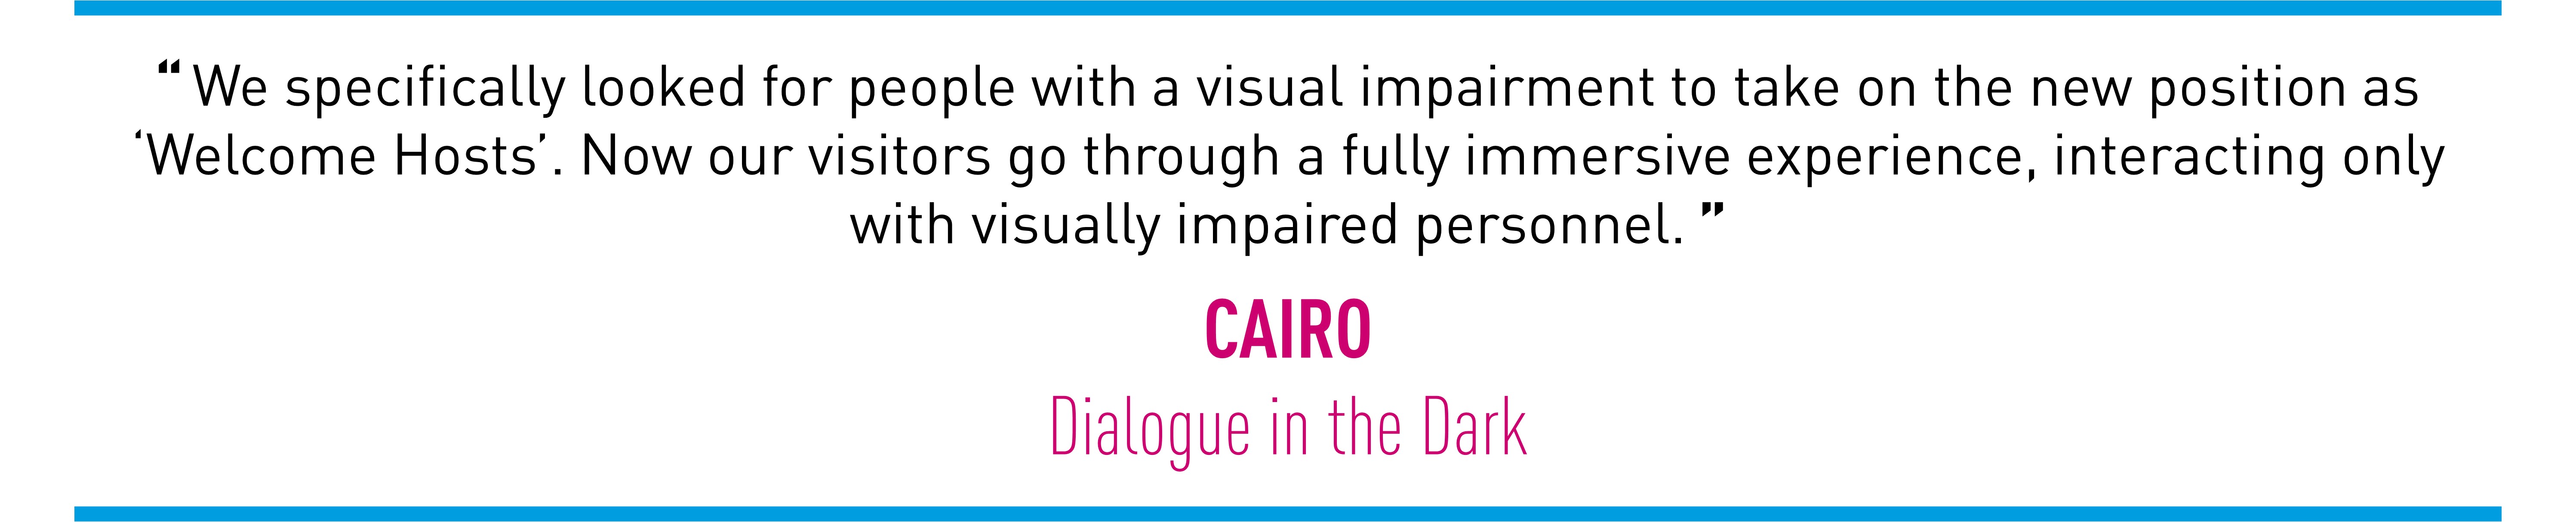 We specifically looked for people with a visual impairment to take on the new position as ‘Welcome Hosts’. Now our visitors go through a fully immersive experience, interacting only with visually impaired personnel. (CAIRO Dialogue in the Dark)